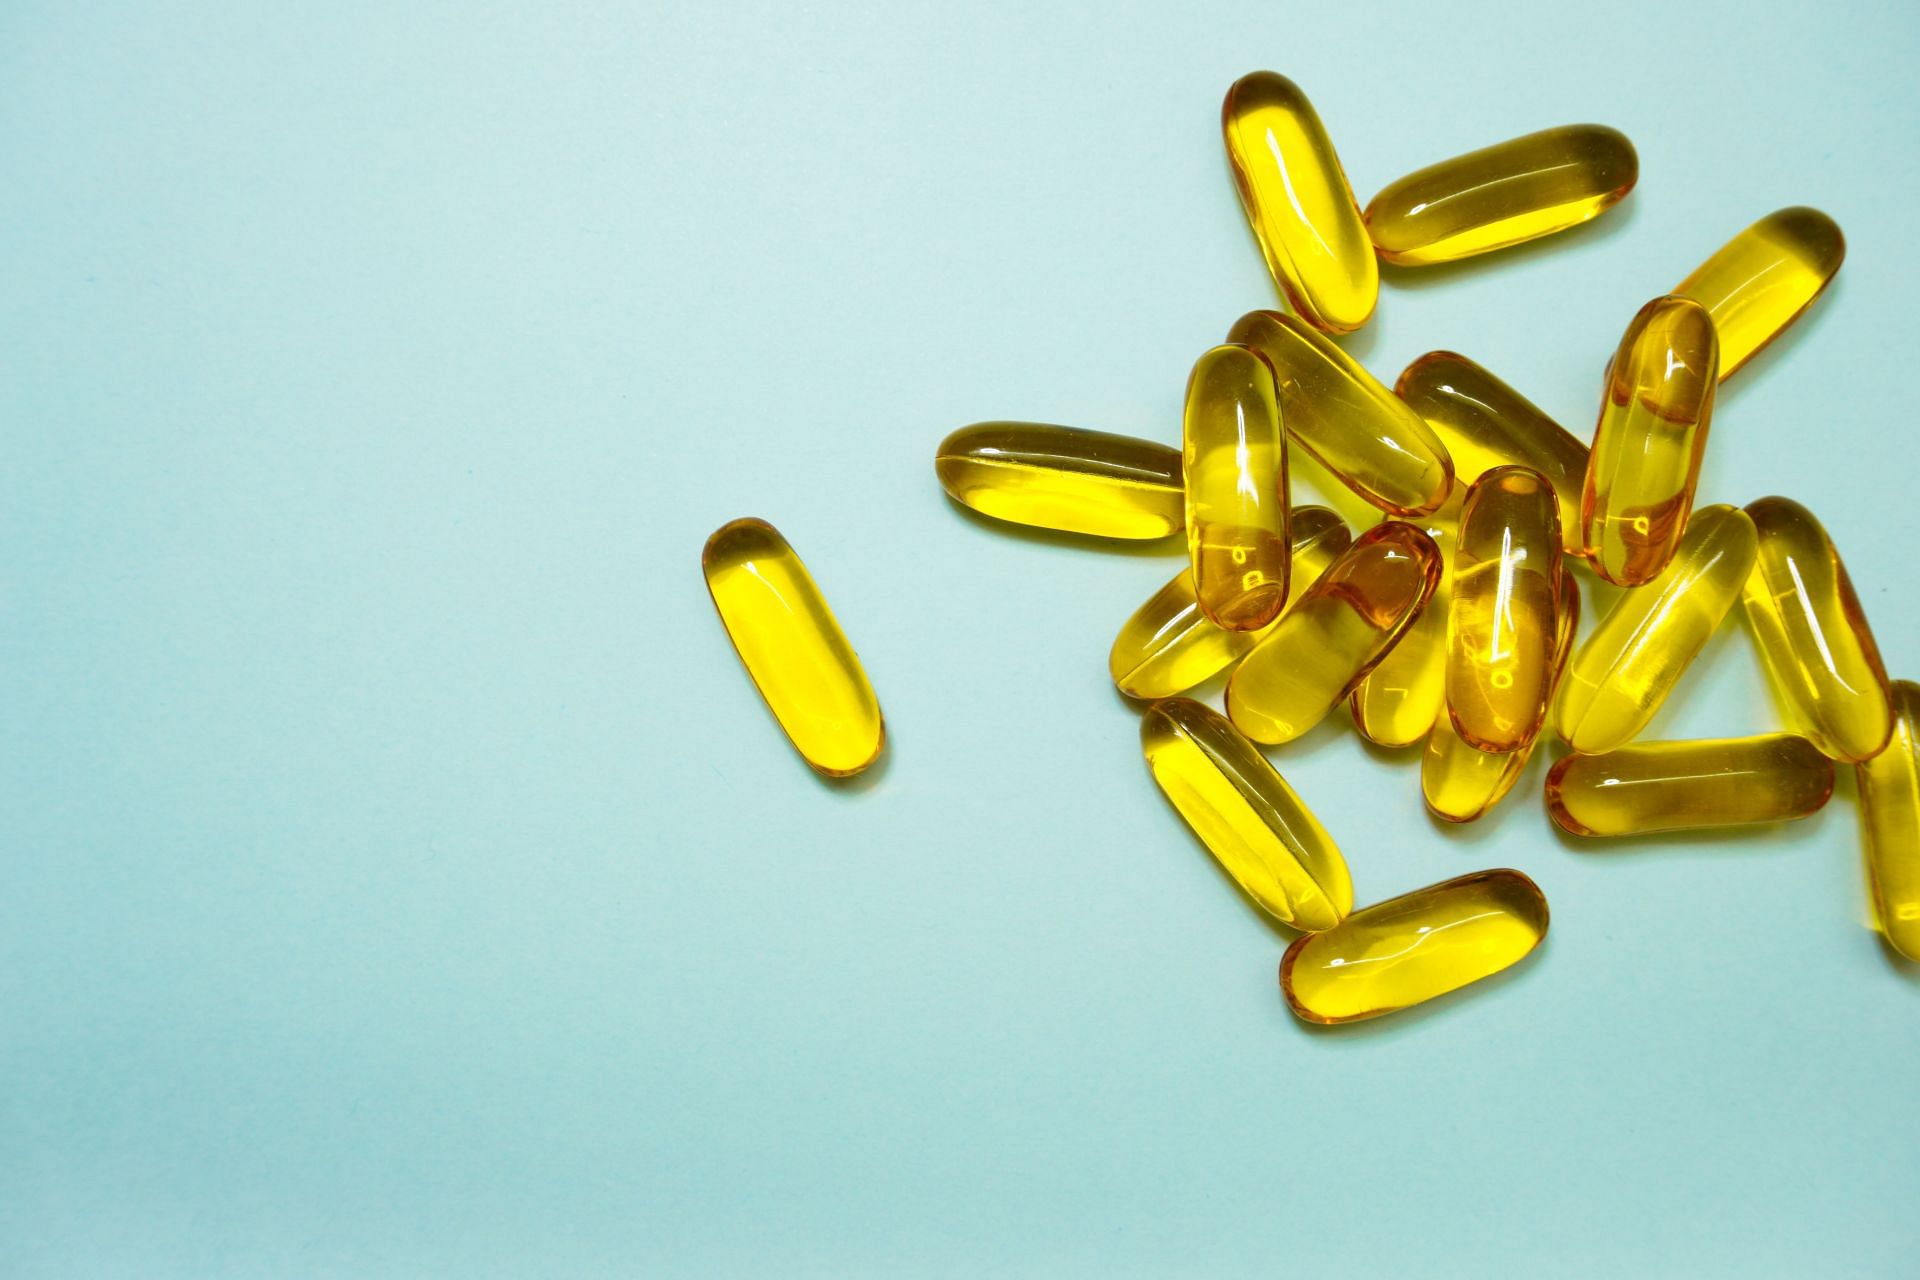 . Omega-3 fatty acids, found in fish oil, lessen discomfort and edema while also preventing blood clots from forming quickly. (Image via Unsplash/ Leohoho)